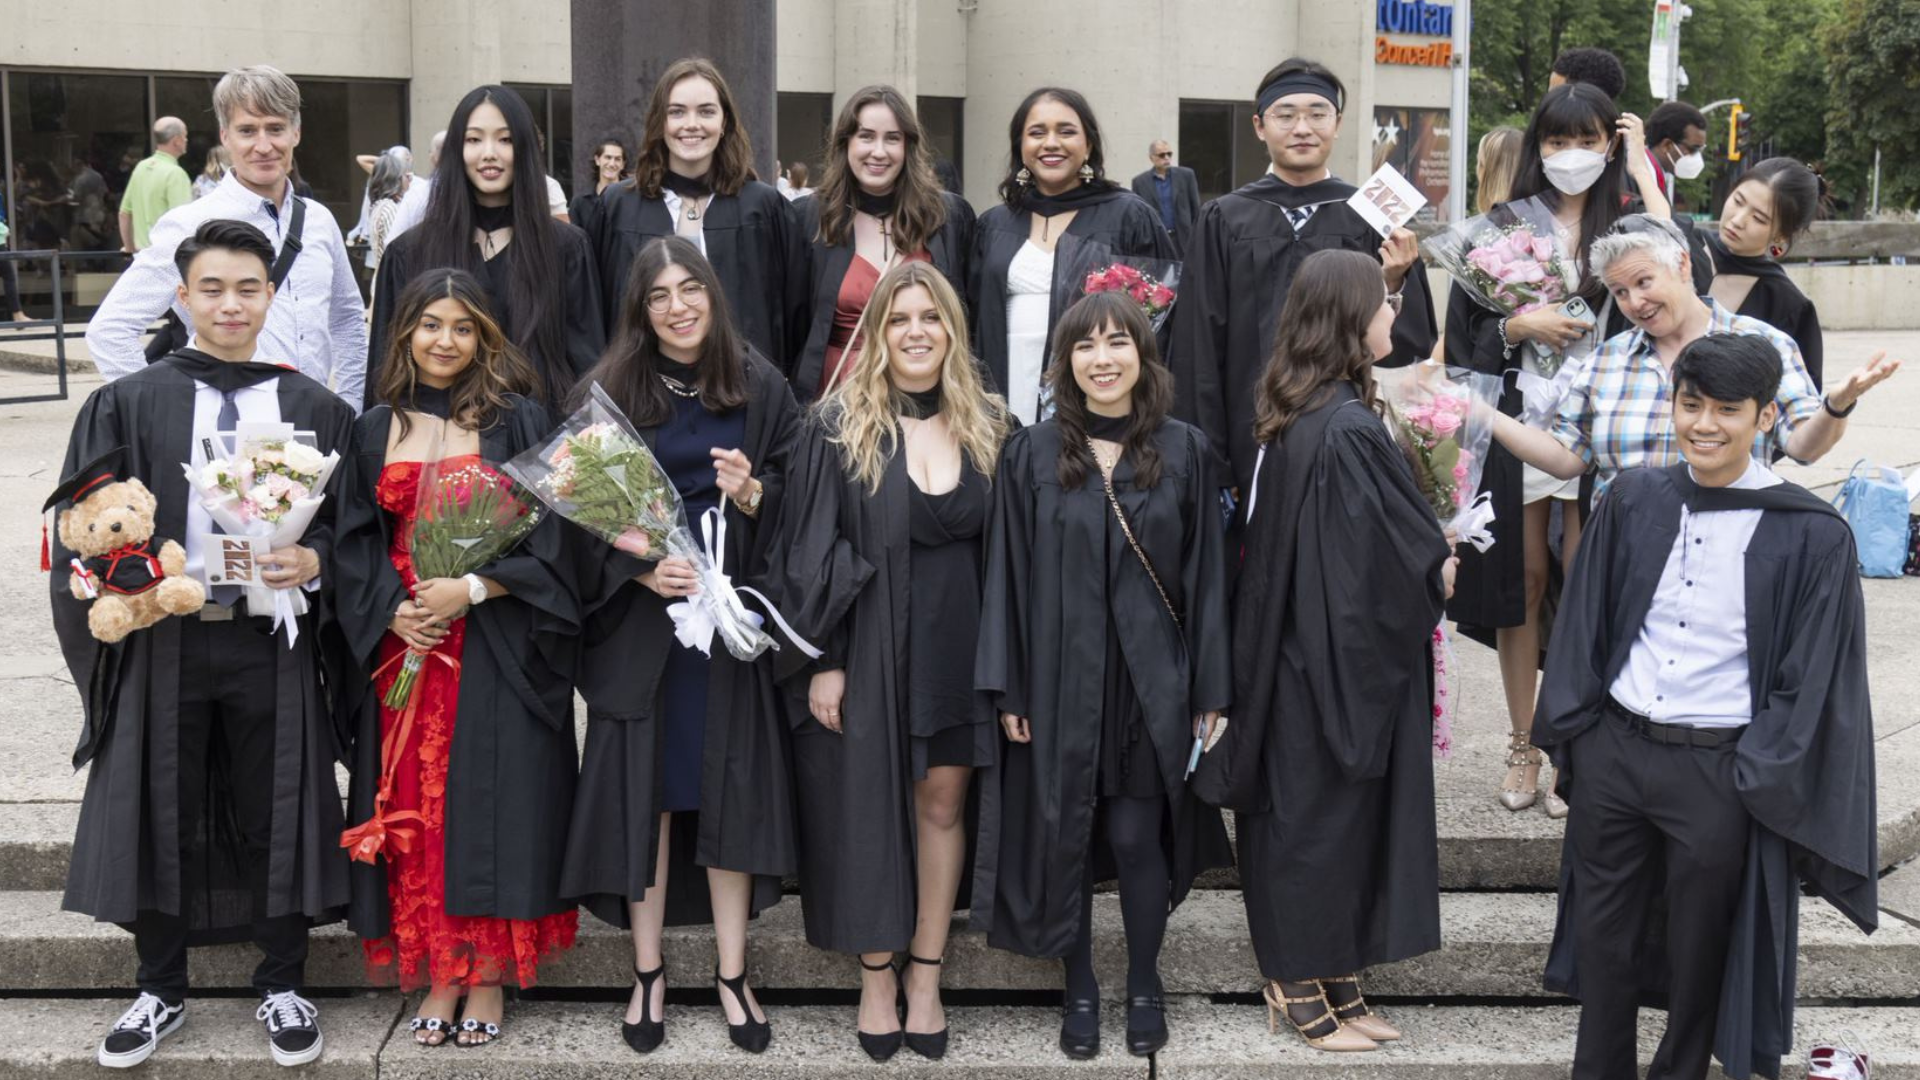 A group of media arts graduates posing for a photo